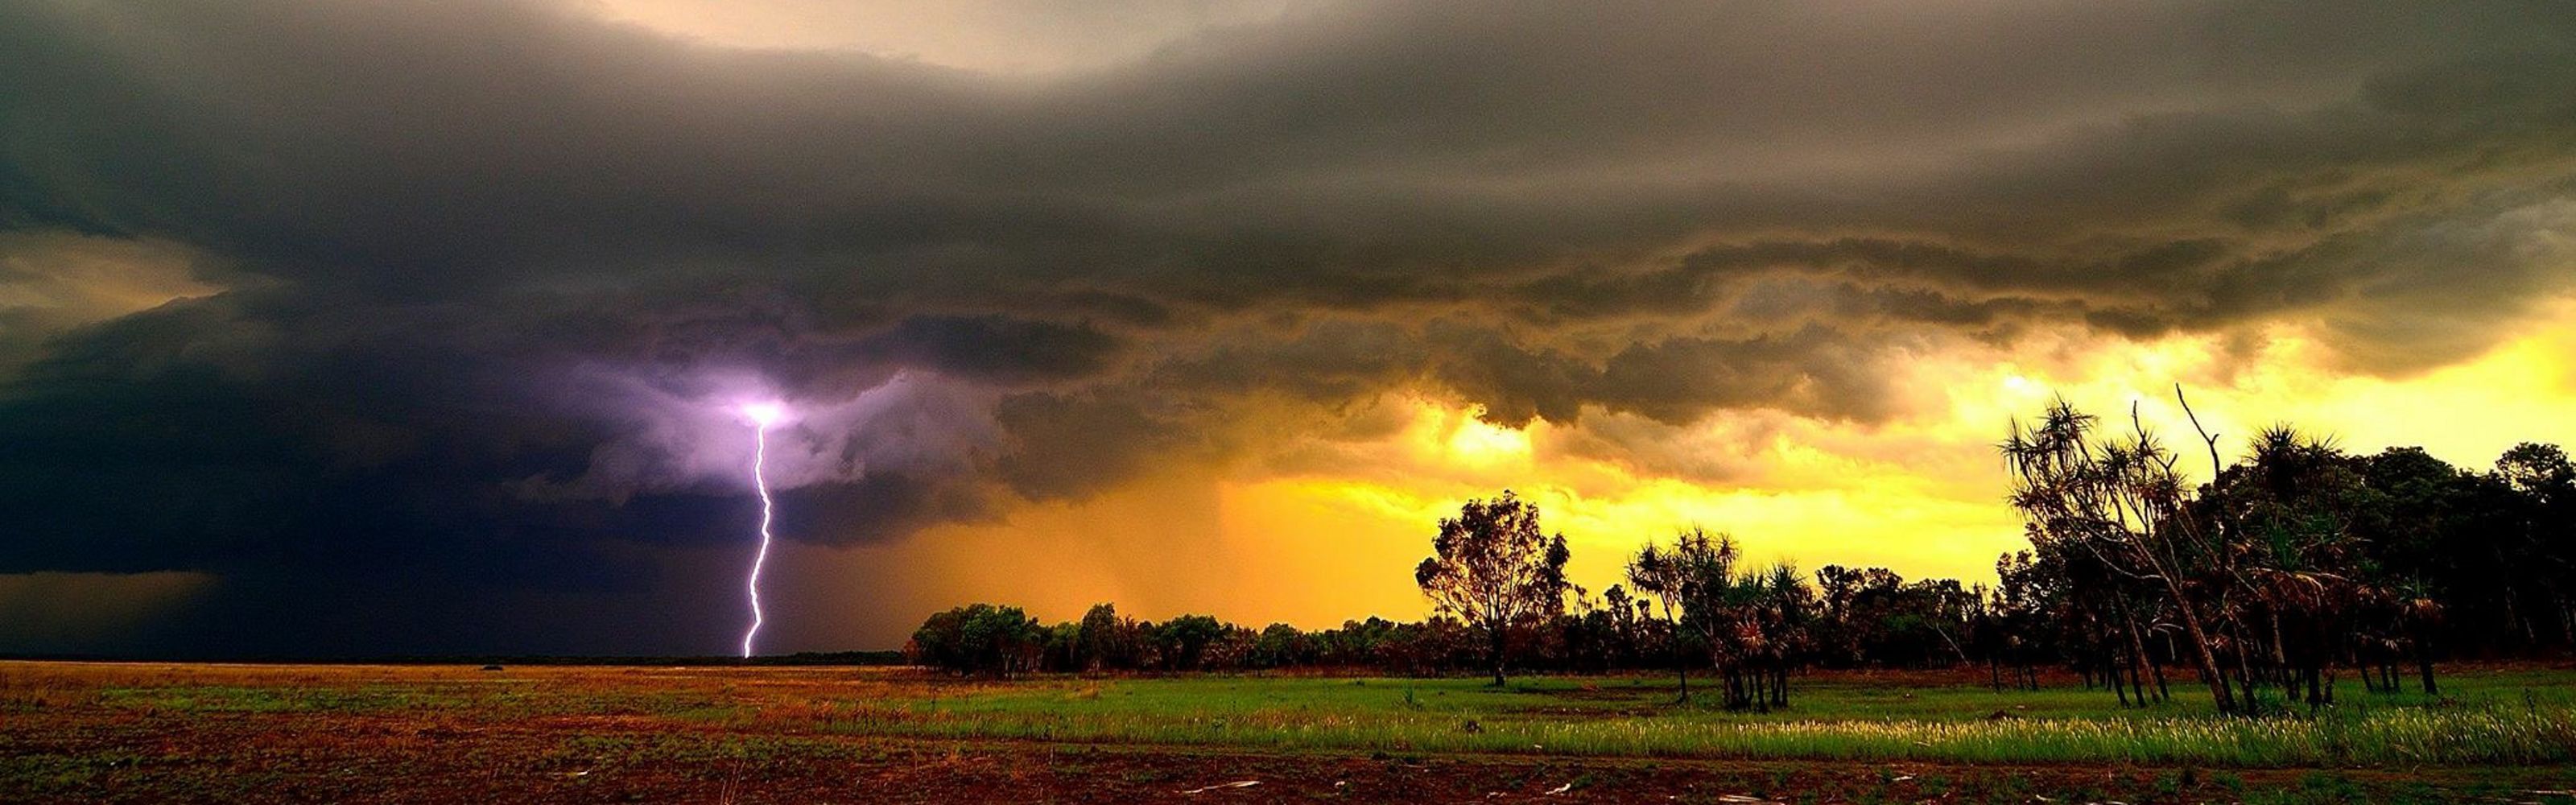 strikes over a field in Northern Territory, Australia.